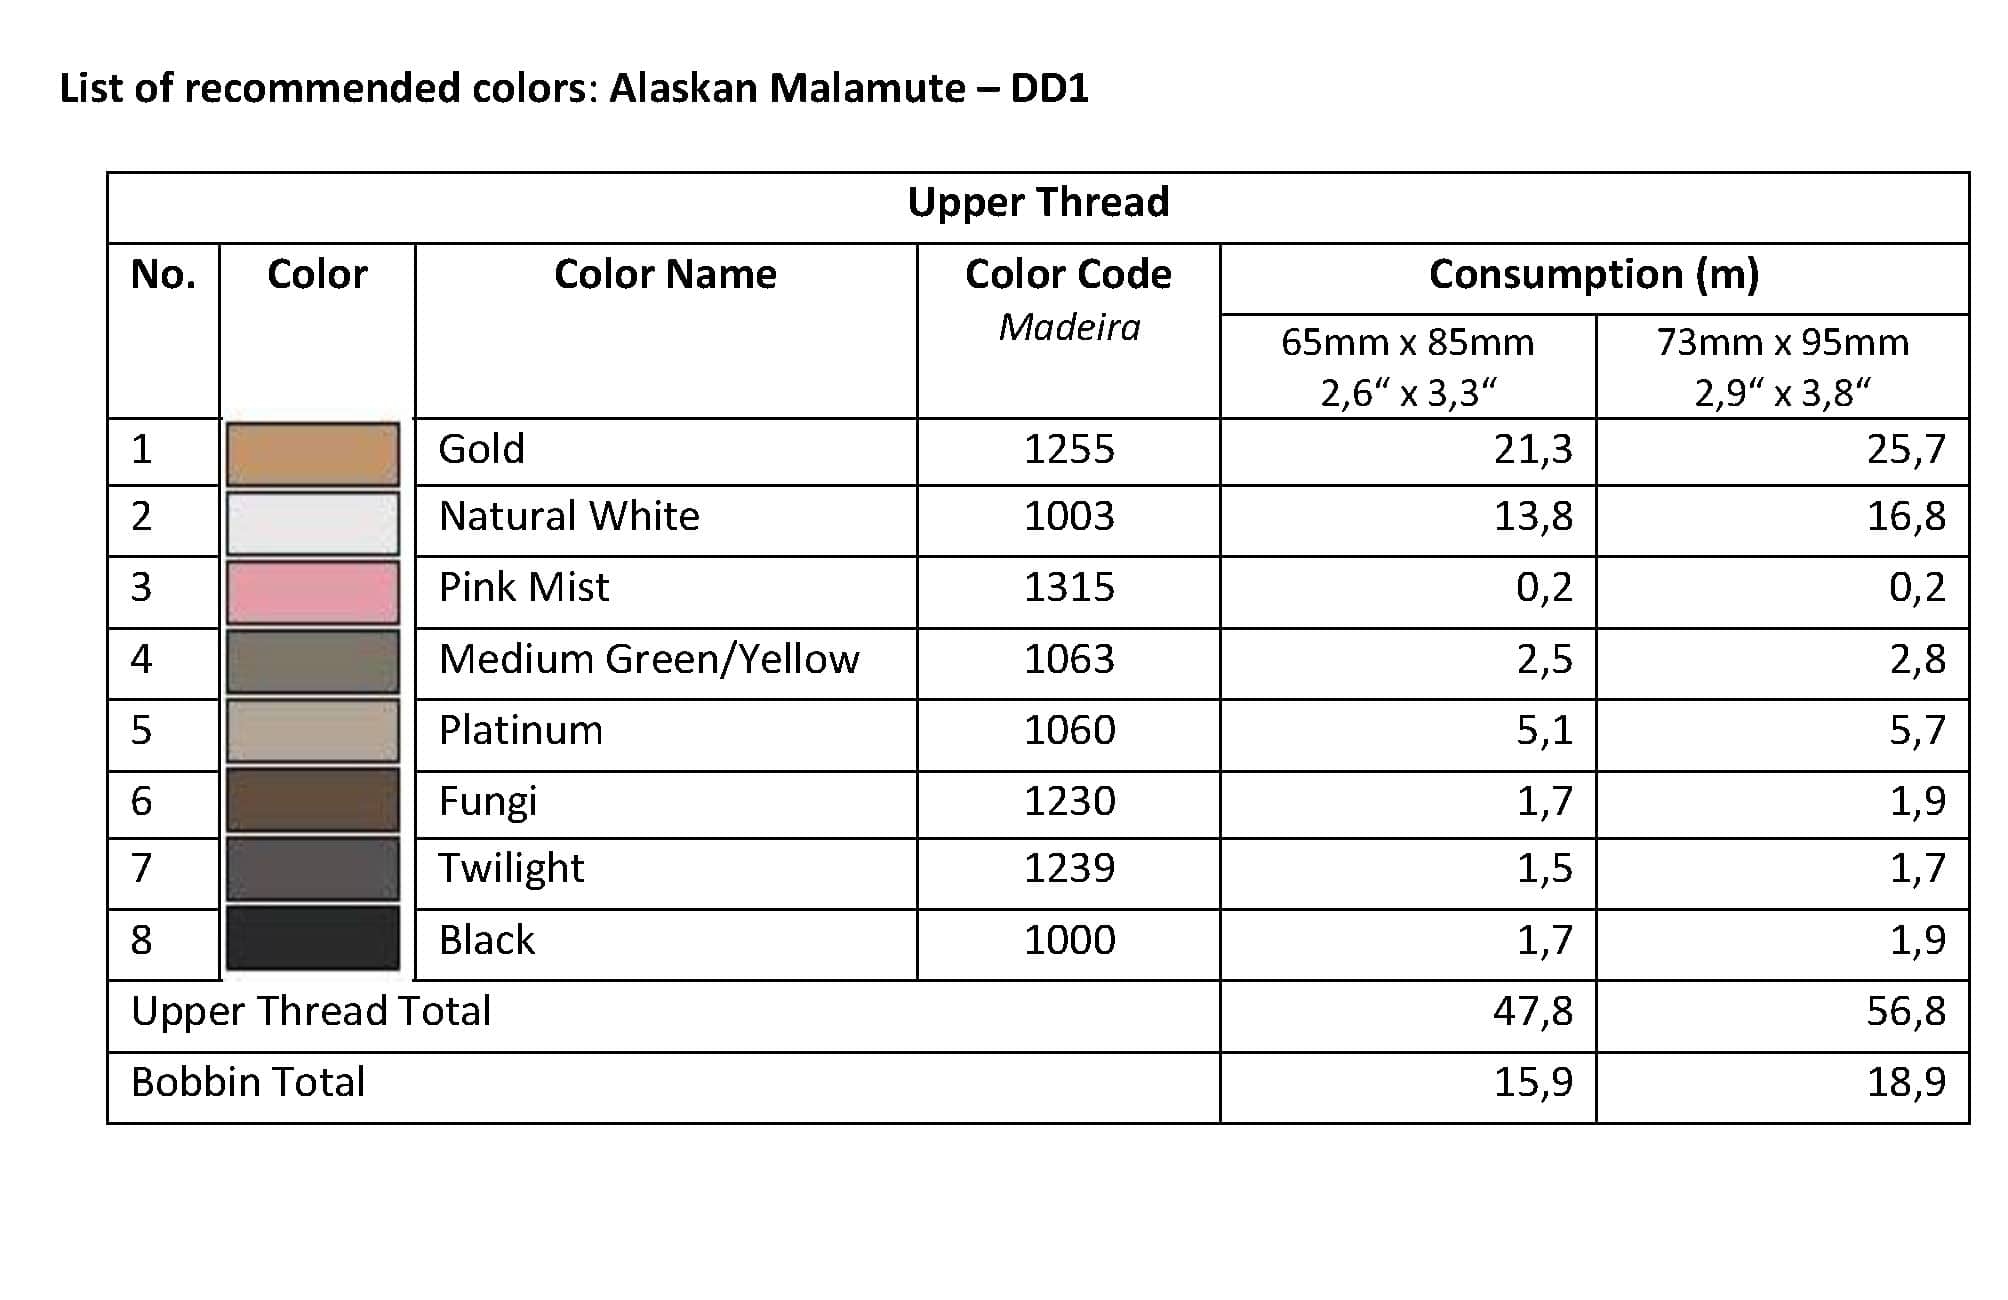 List of Recommended Colors - Alaskan Malamute DD1